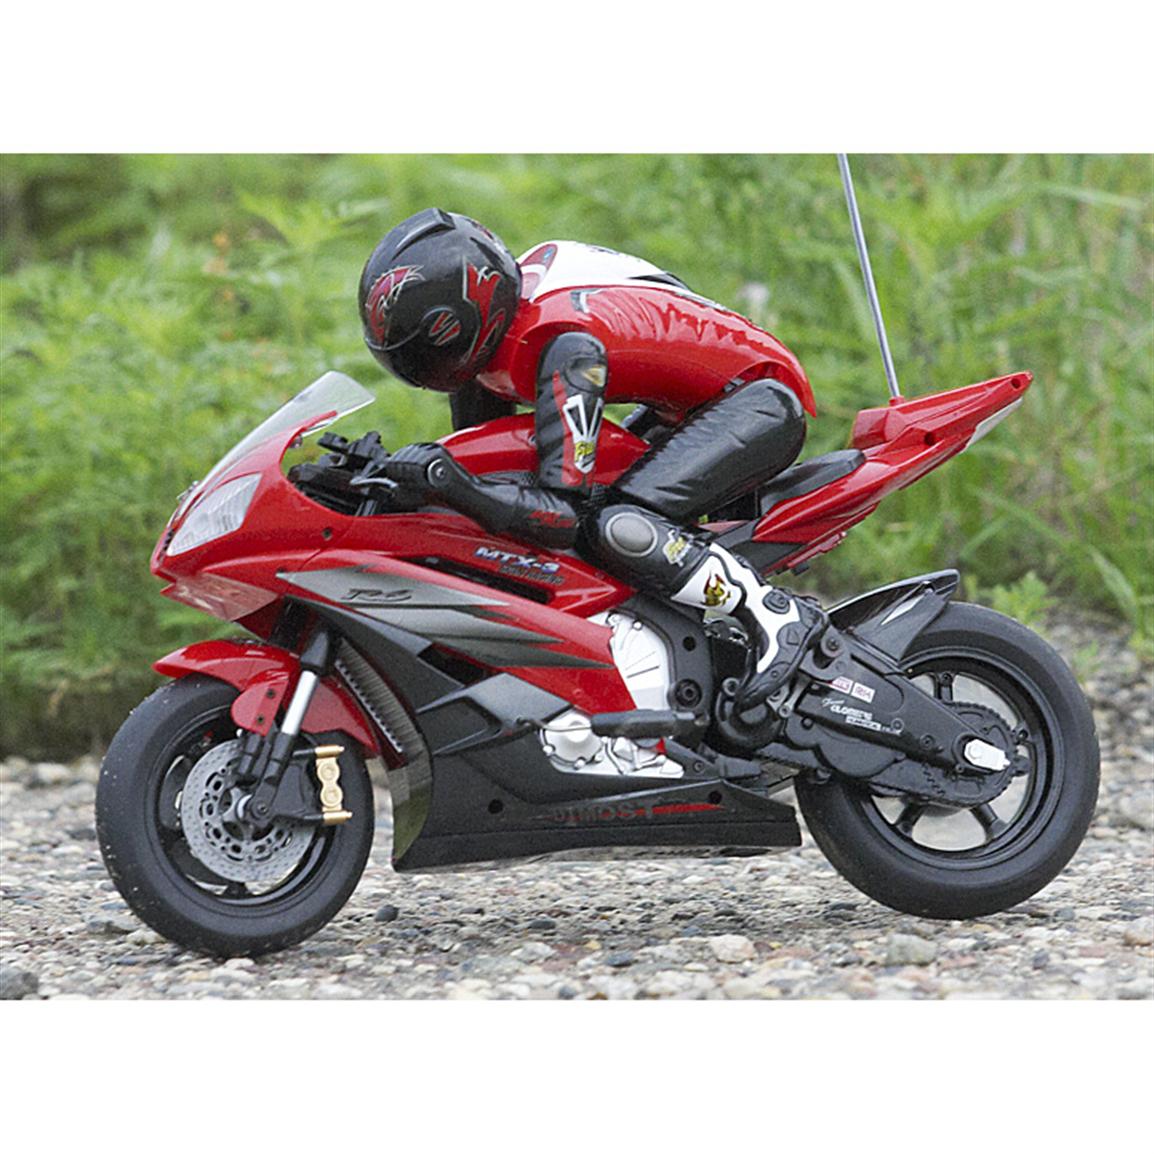 Radio - controlled Motorcycle - 212117, Remote Control Toys at Sportsman's Guide